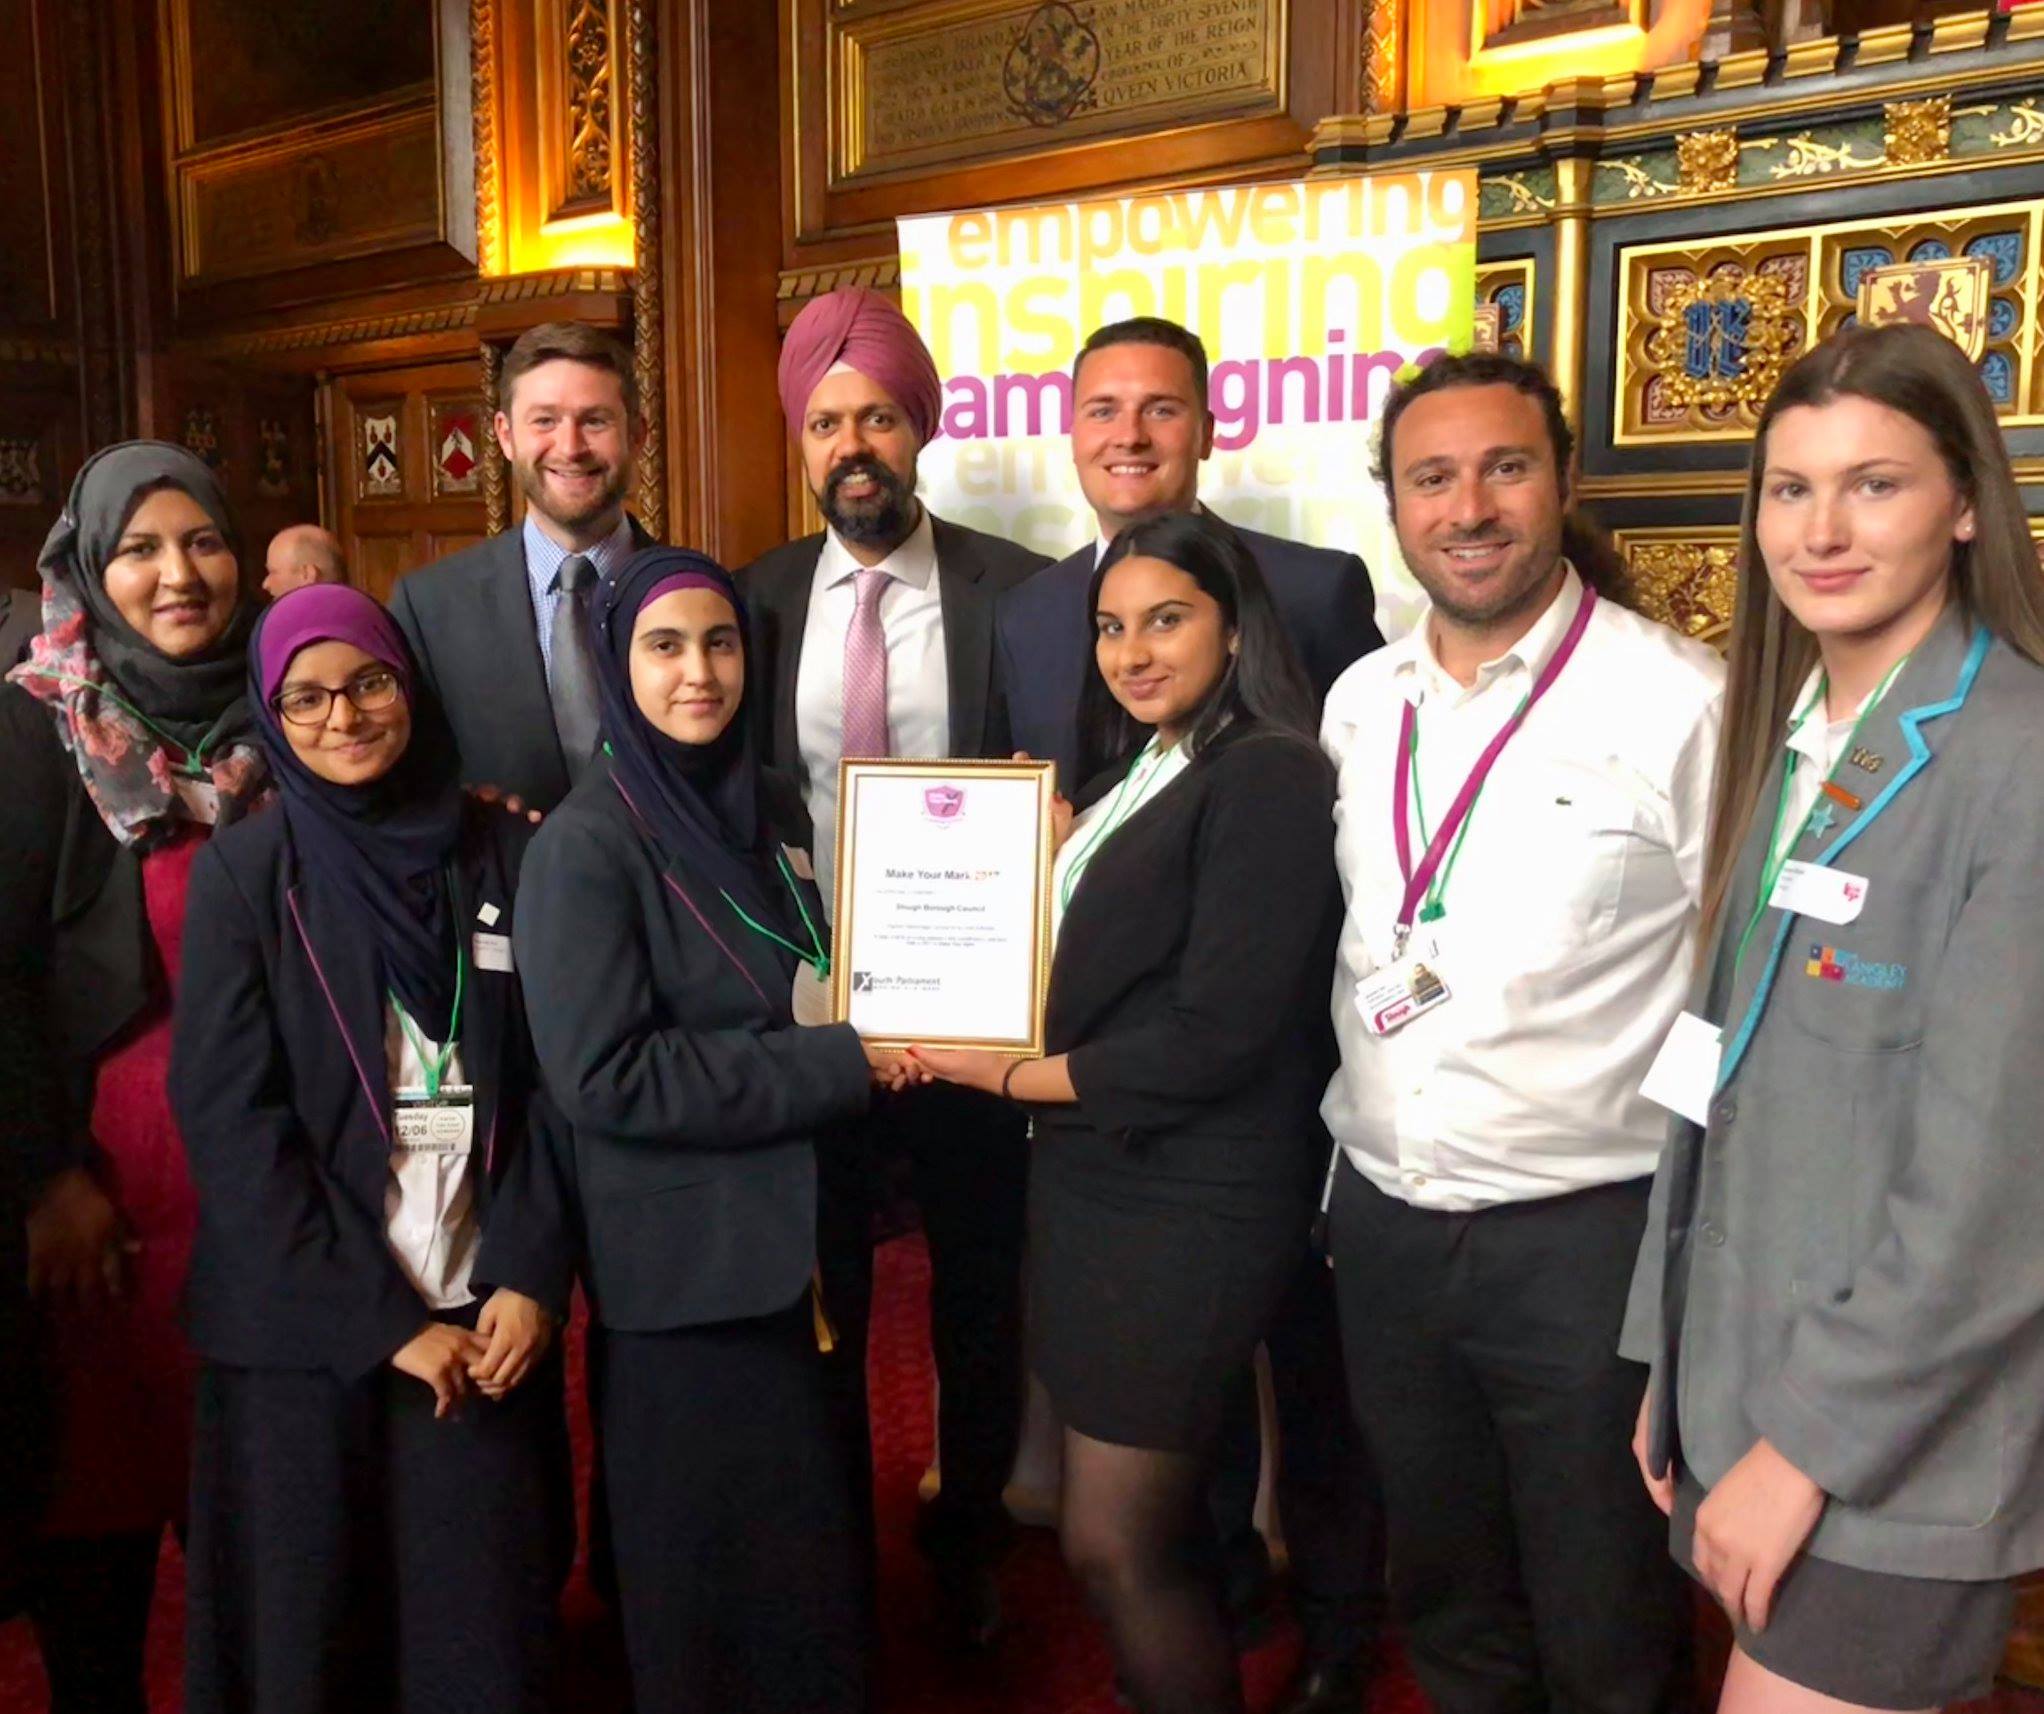 Members of Slough Youth Parliament receive their award for the Make Your Mark campaign